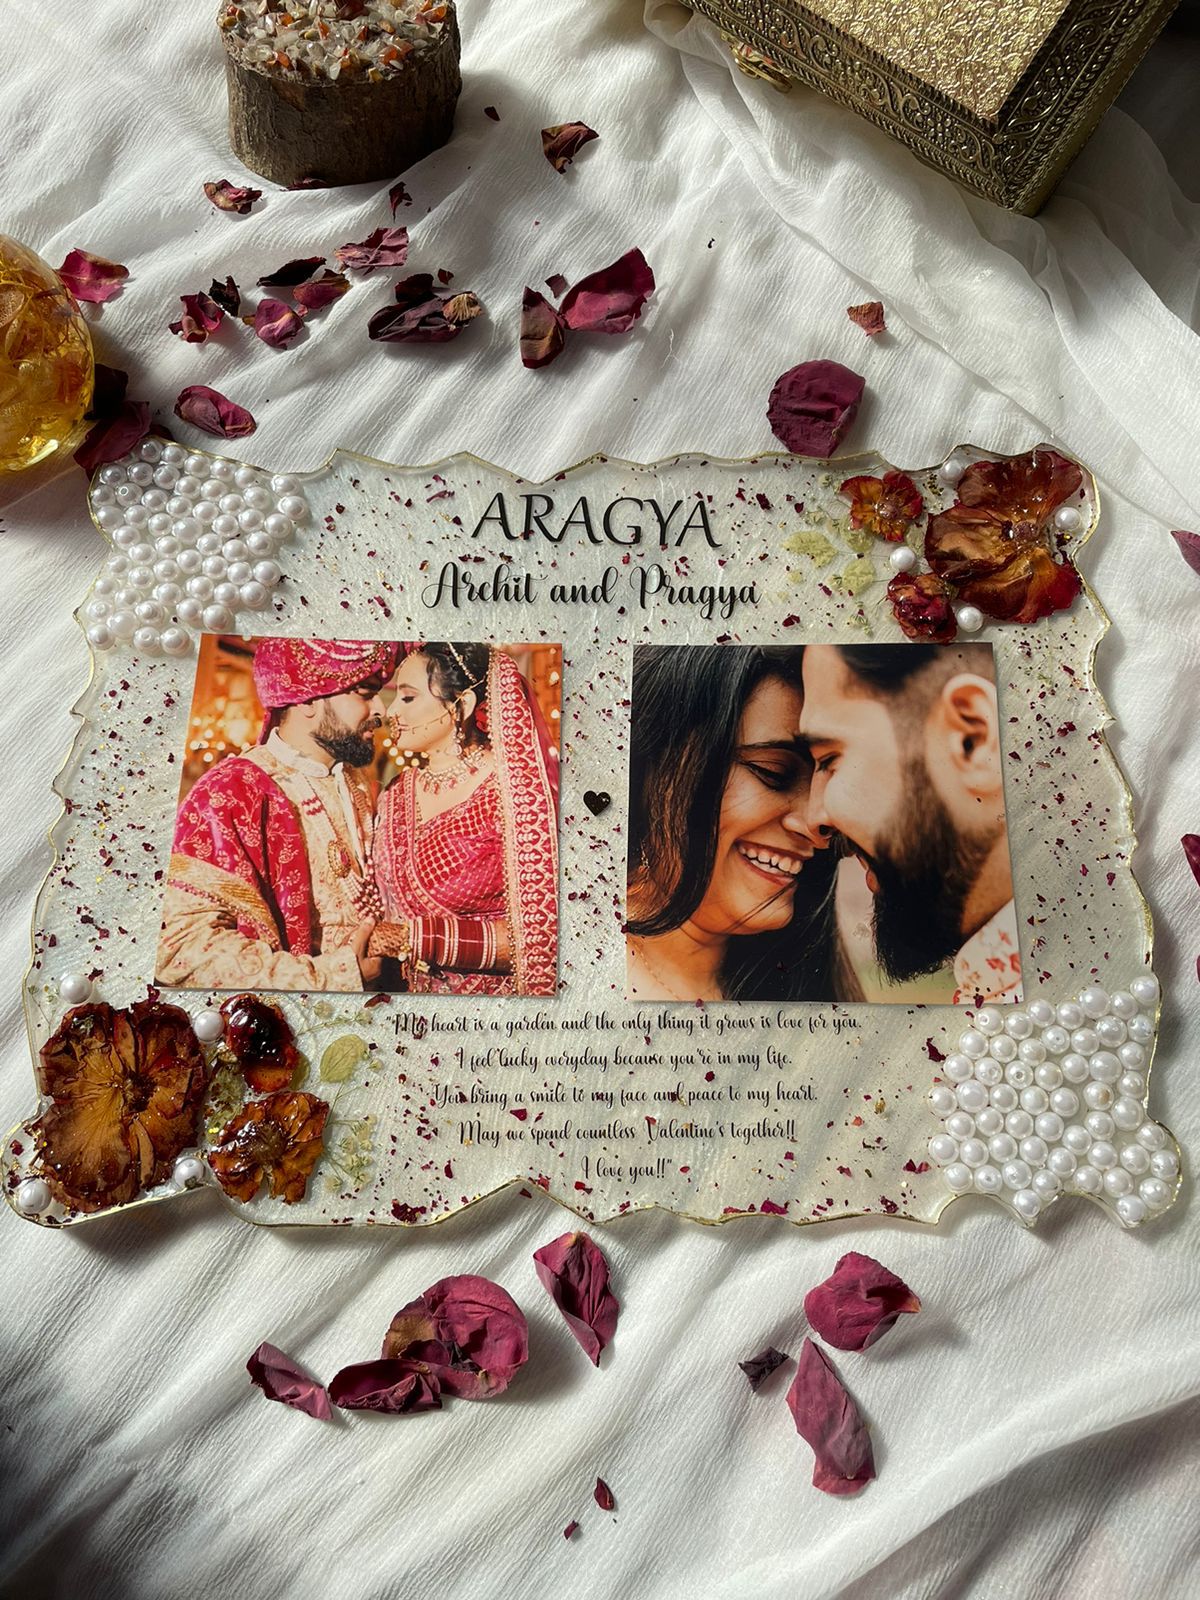 Enchanted Love: Resin Couple Photo Frame with Pearls and Engraved Names